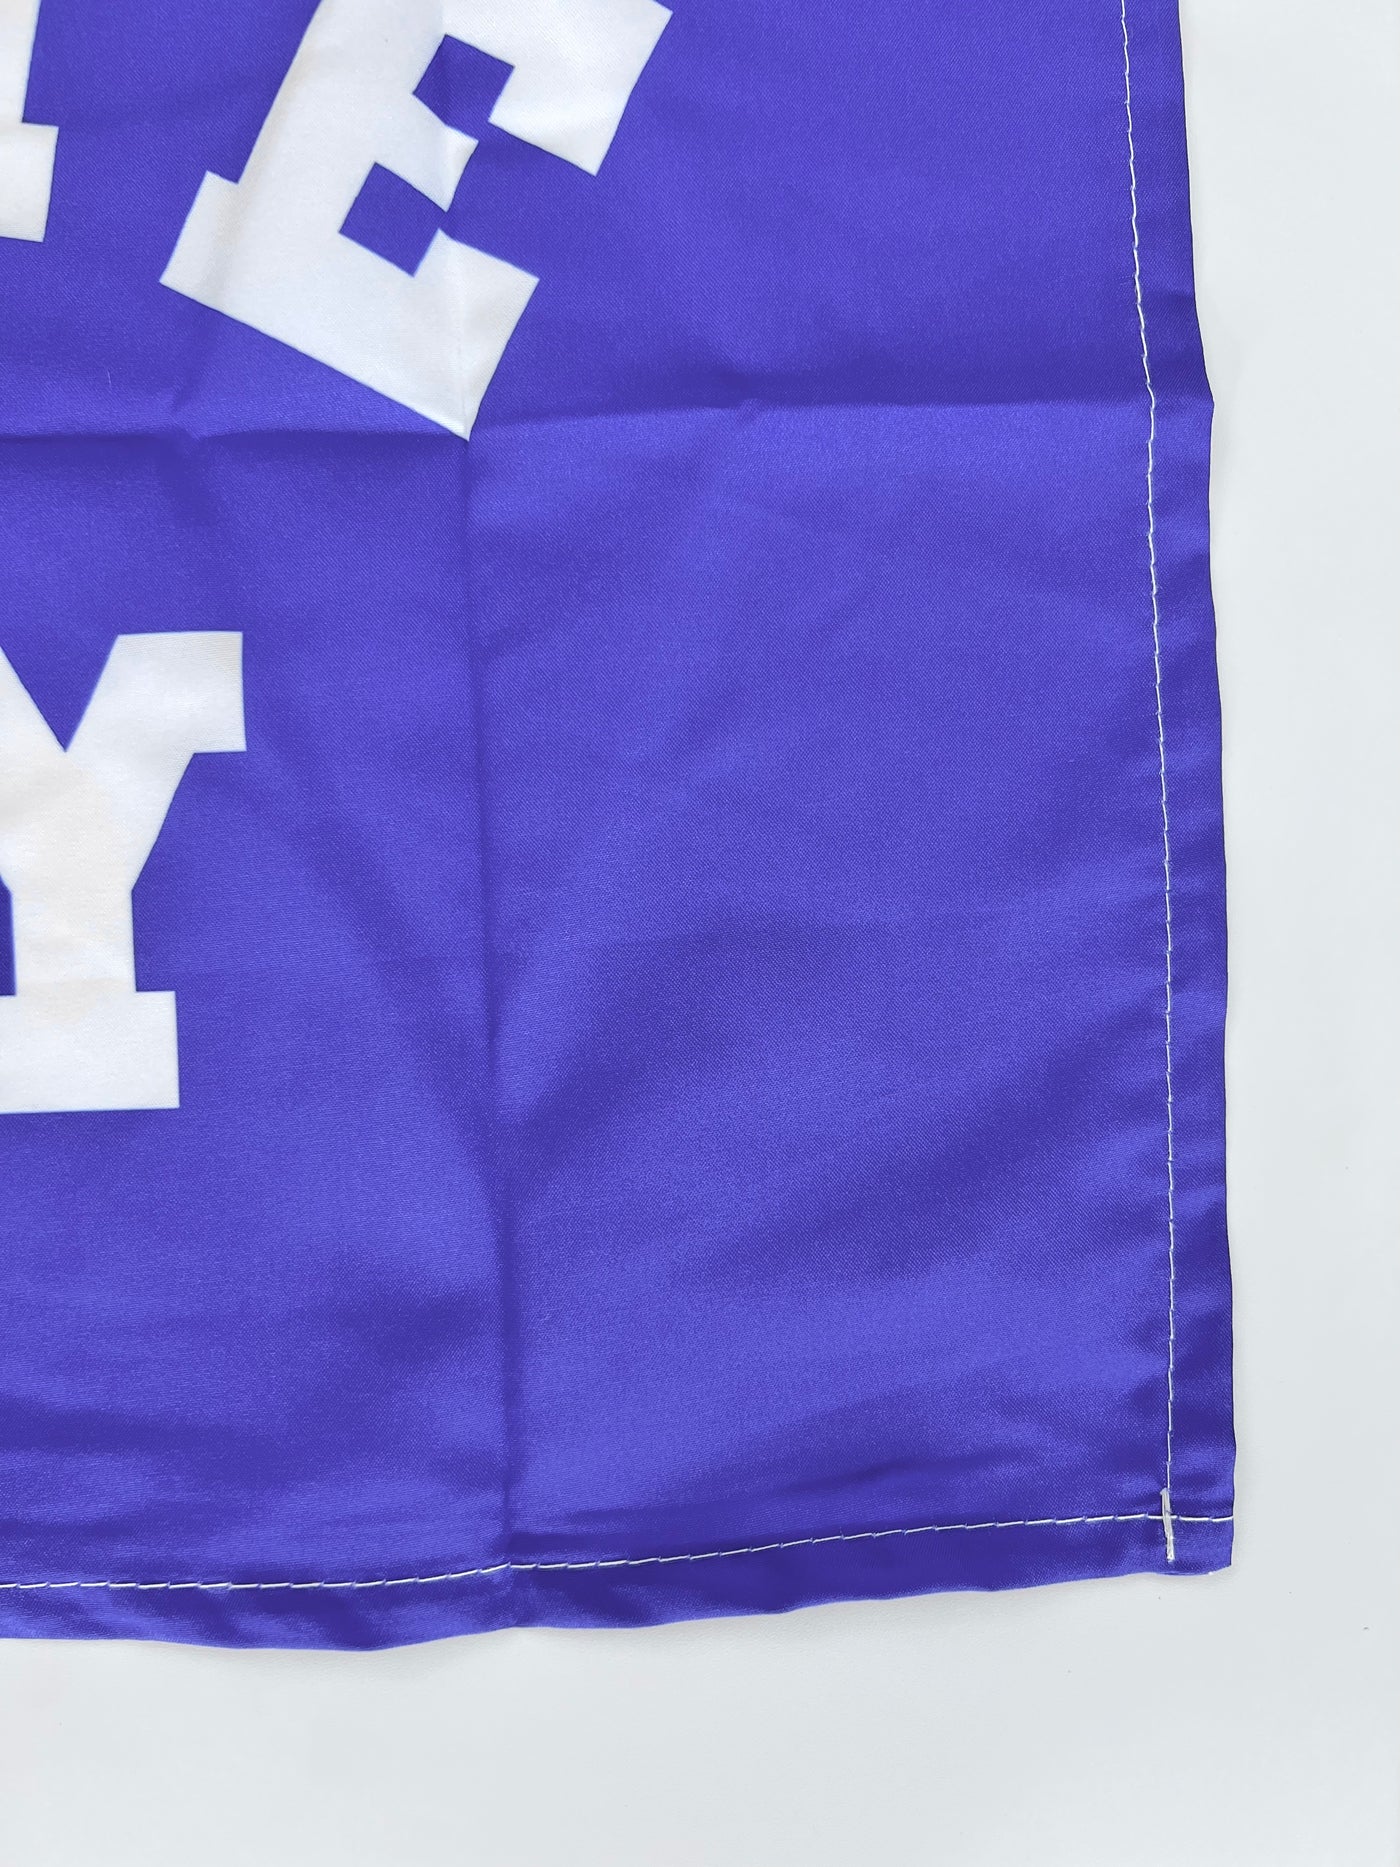 IMPERFECT {Blue/Purple} Game Day Banner